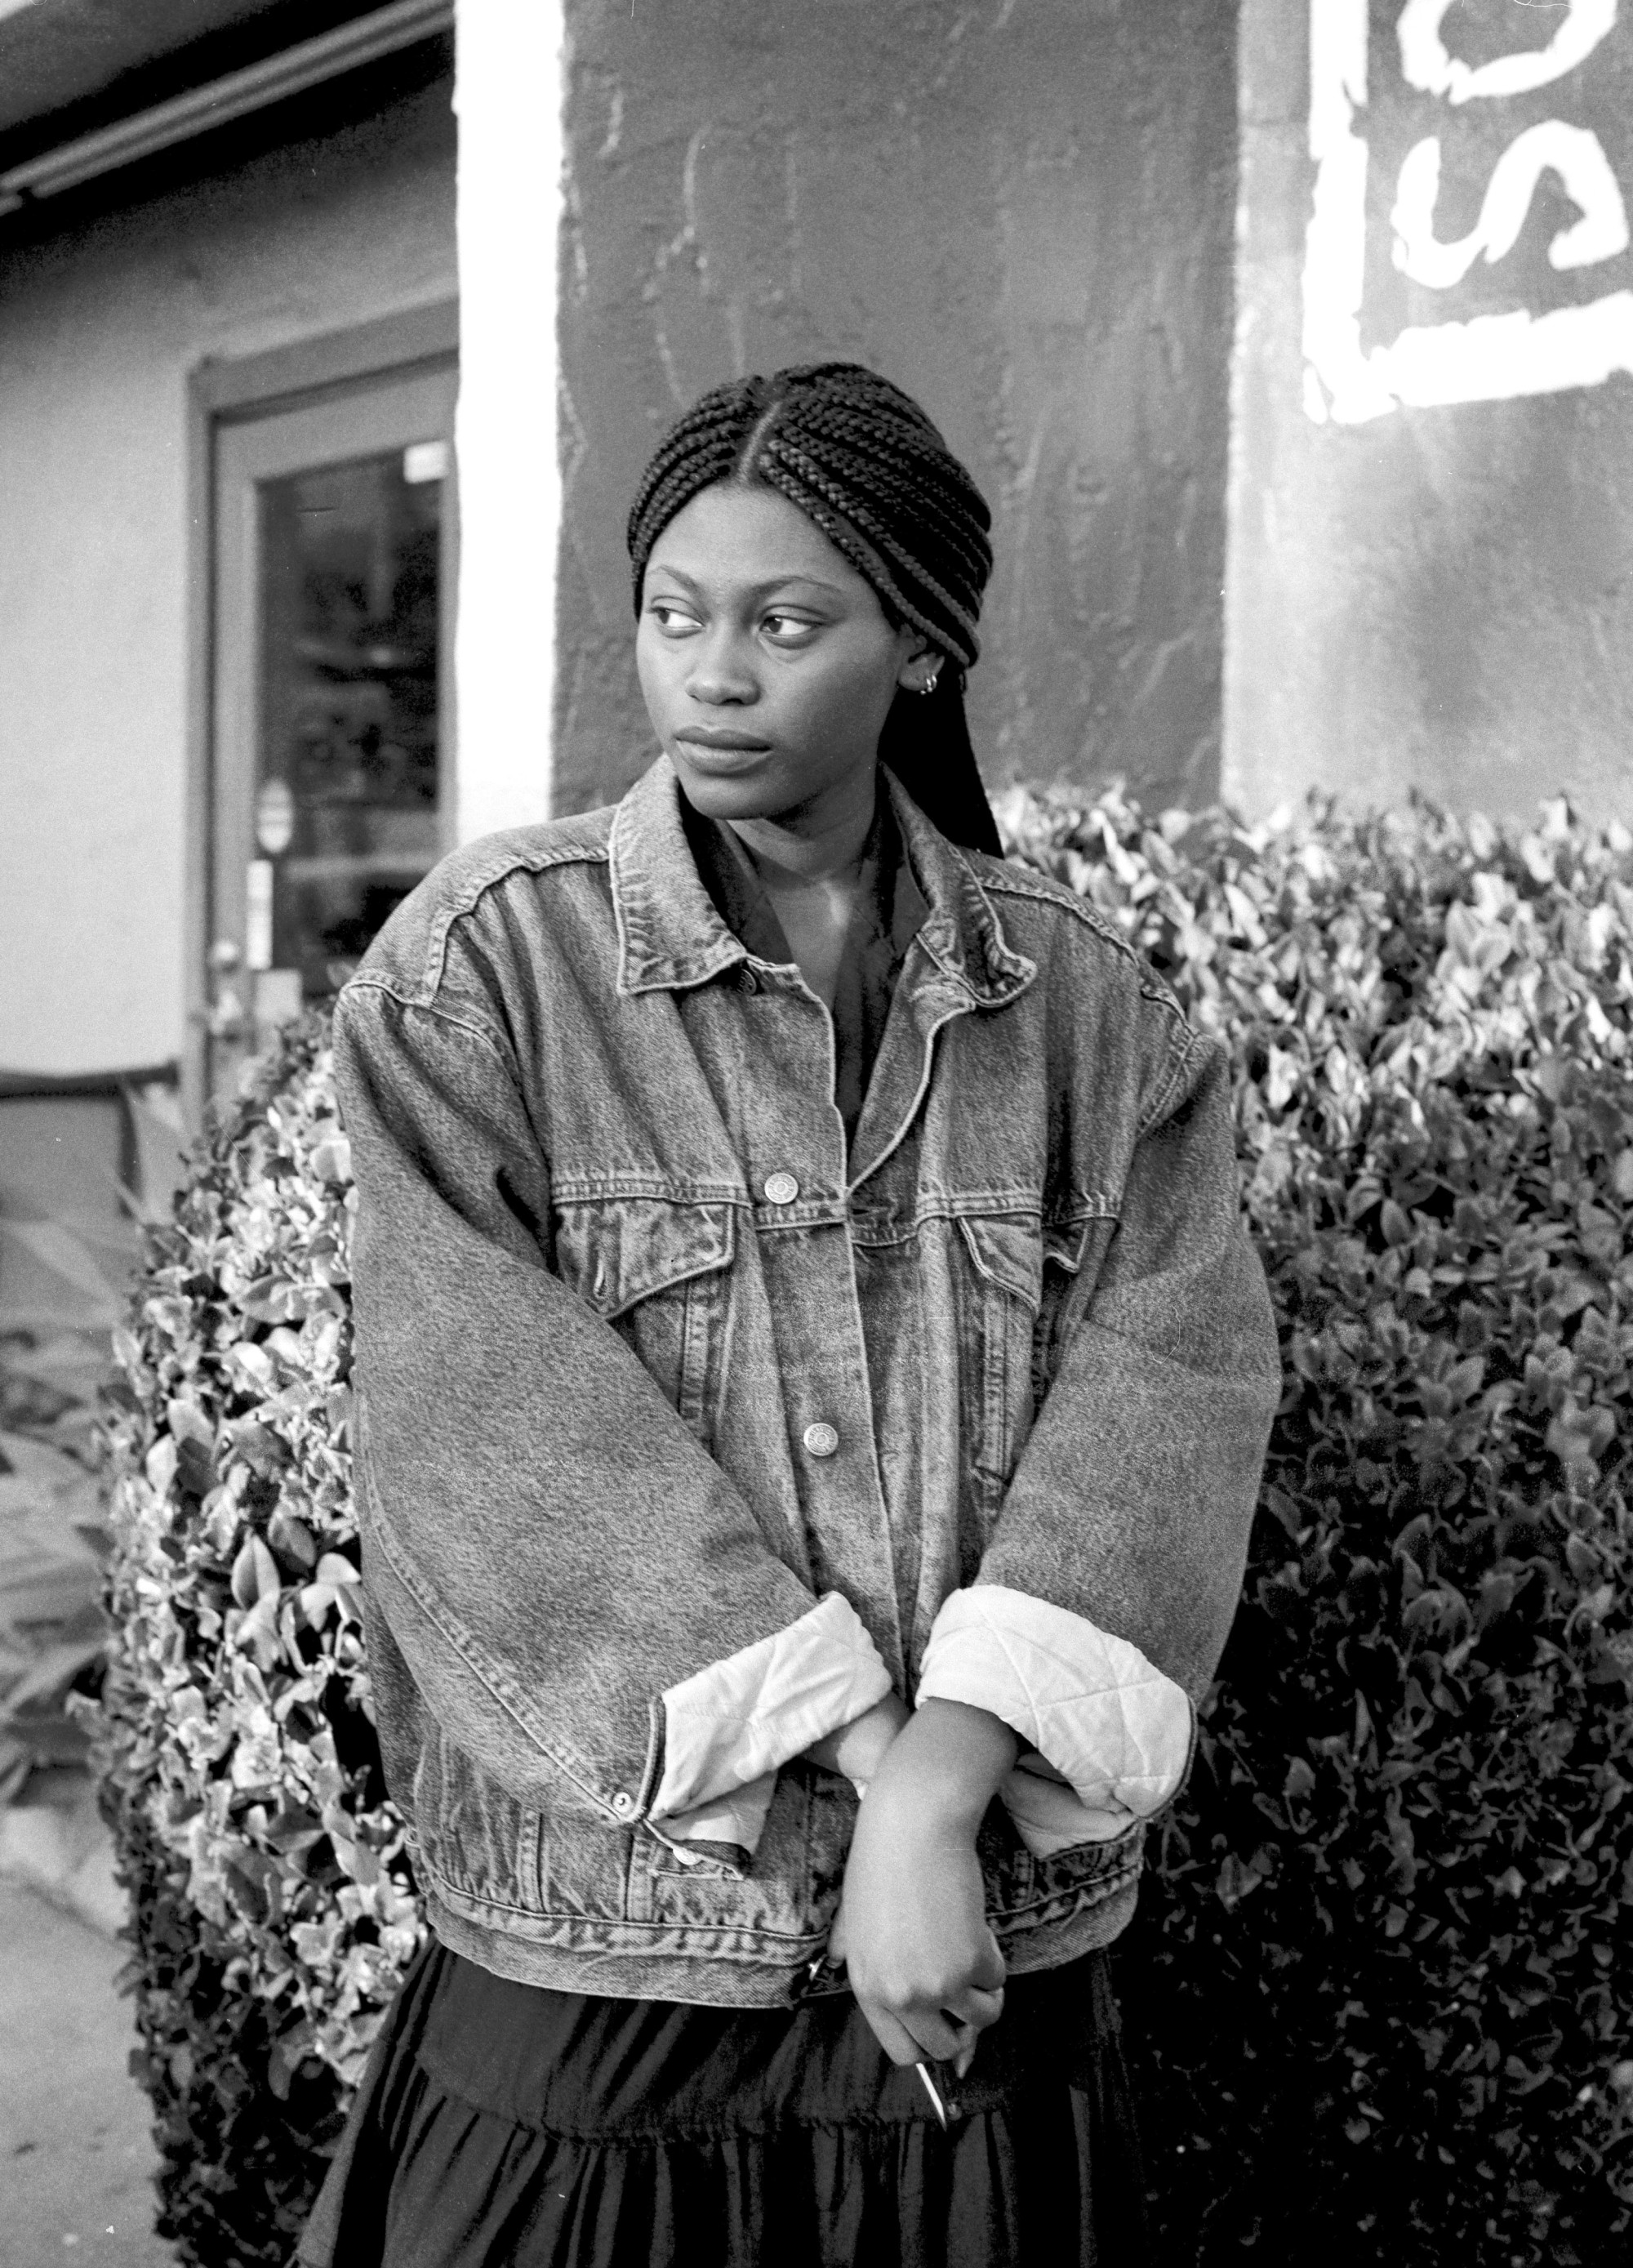 Funto Omojola stands in front of a shrub with hands clasped together, wearing a denim jacket and looking off to the side.